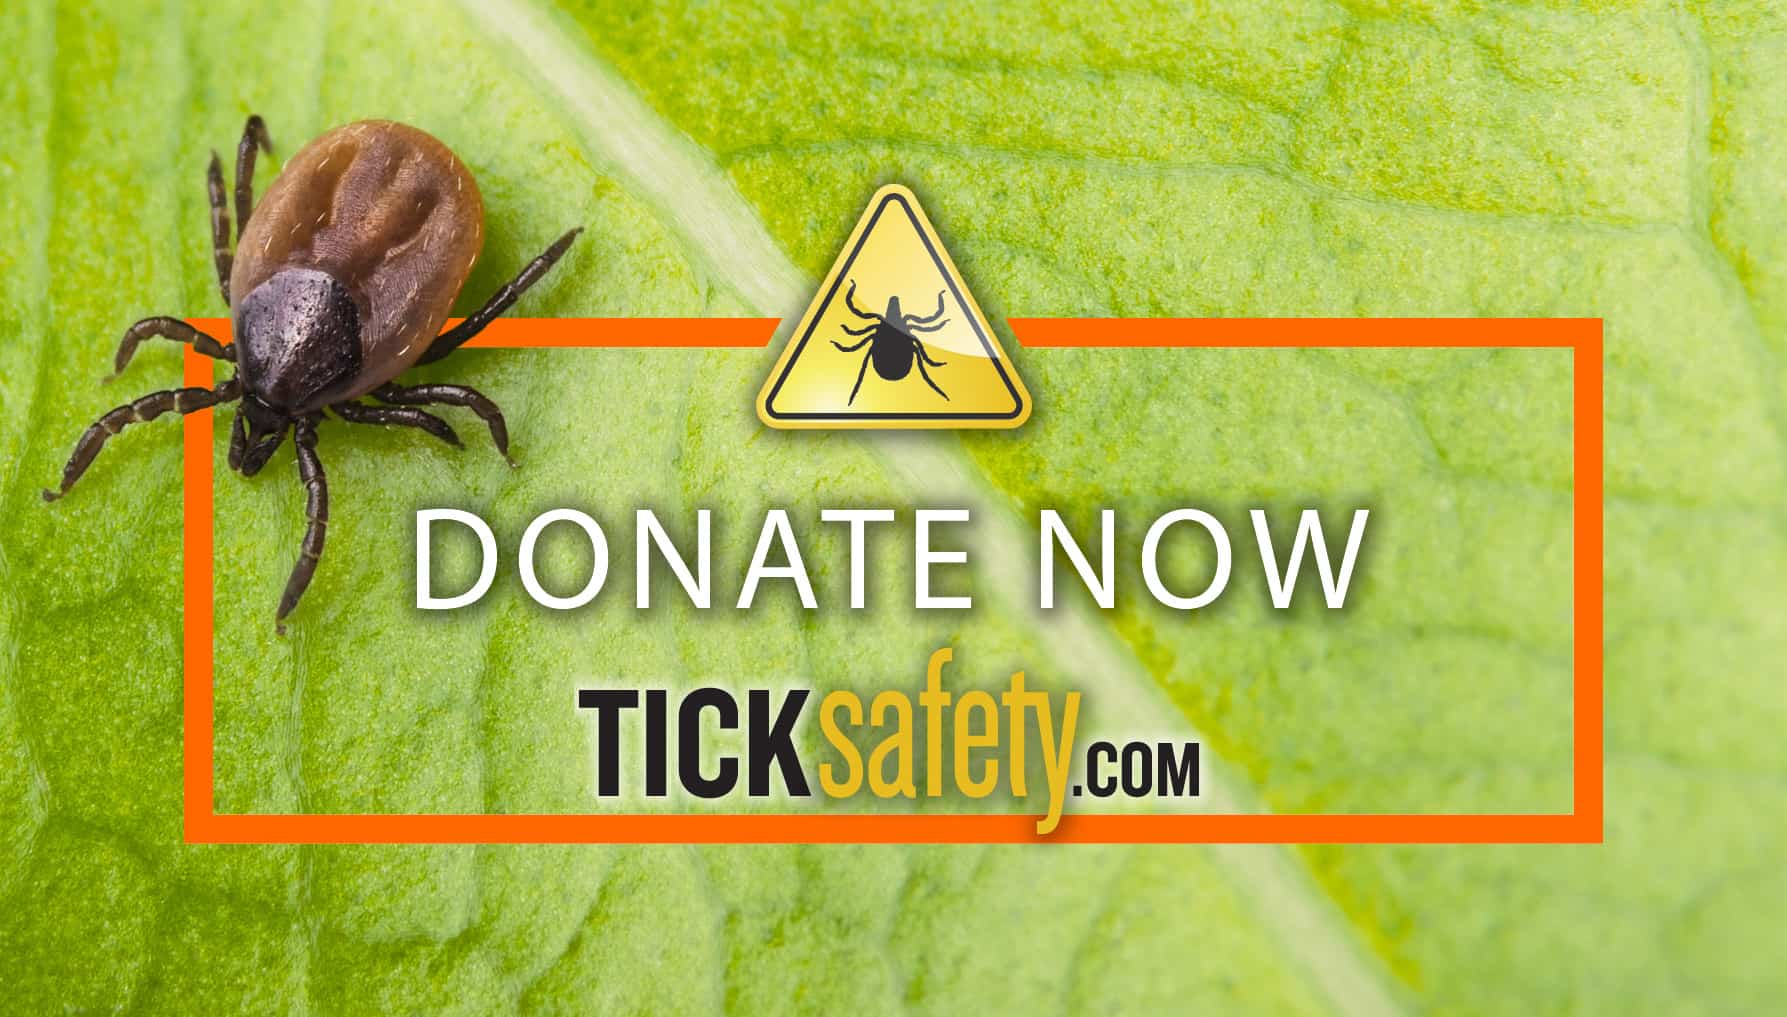 When a tick bites how long does it stay attached? • TickSafety.com | Tick Safety Education • Awareness • Lyme Testing